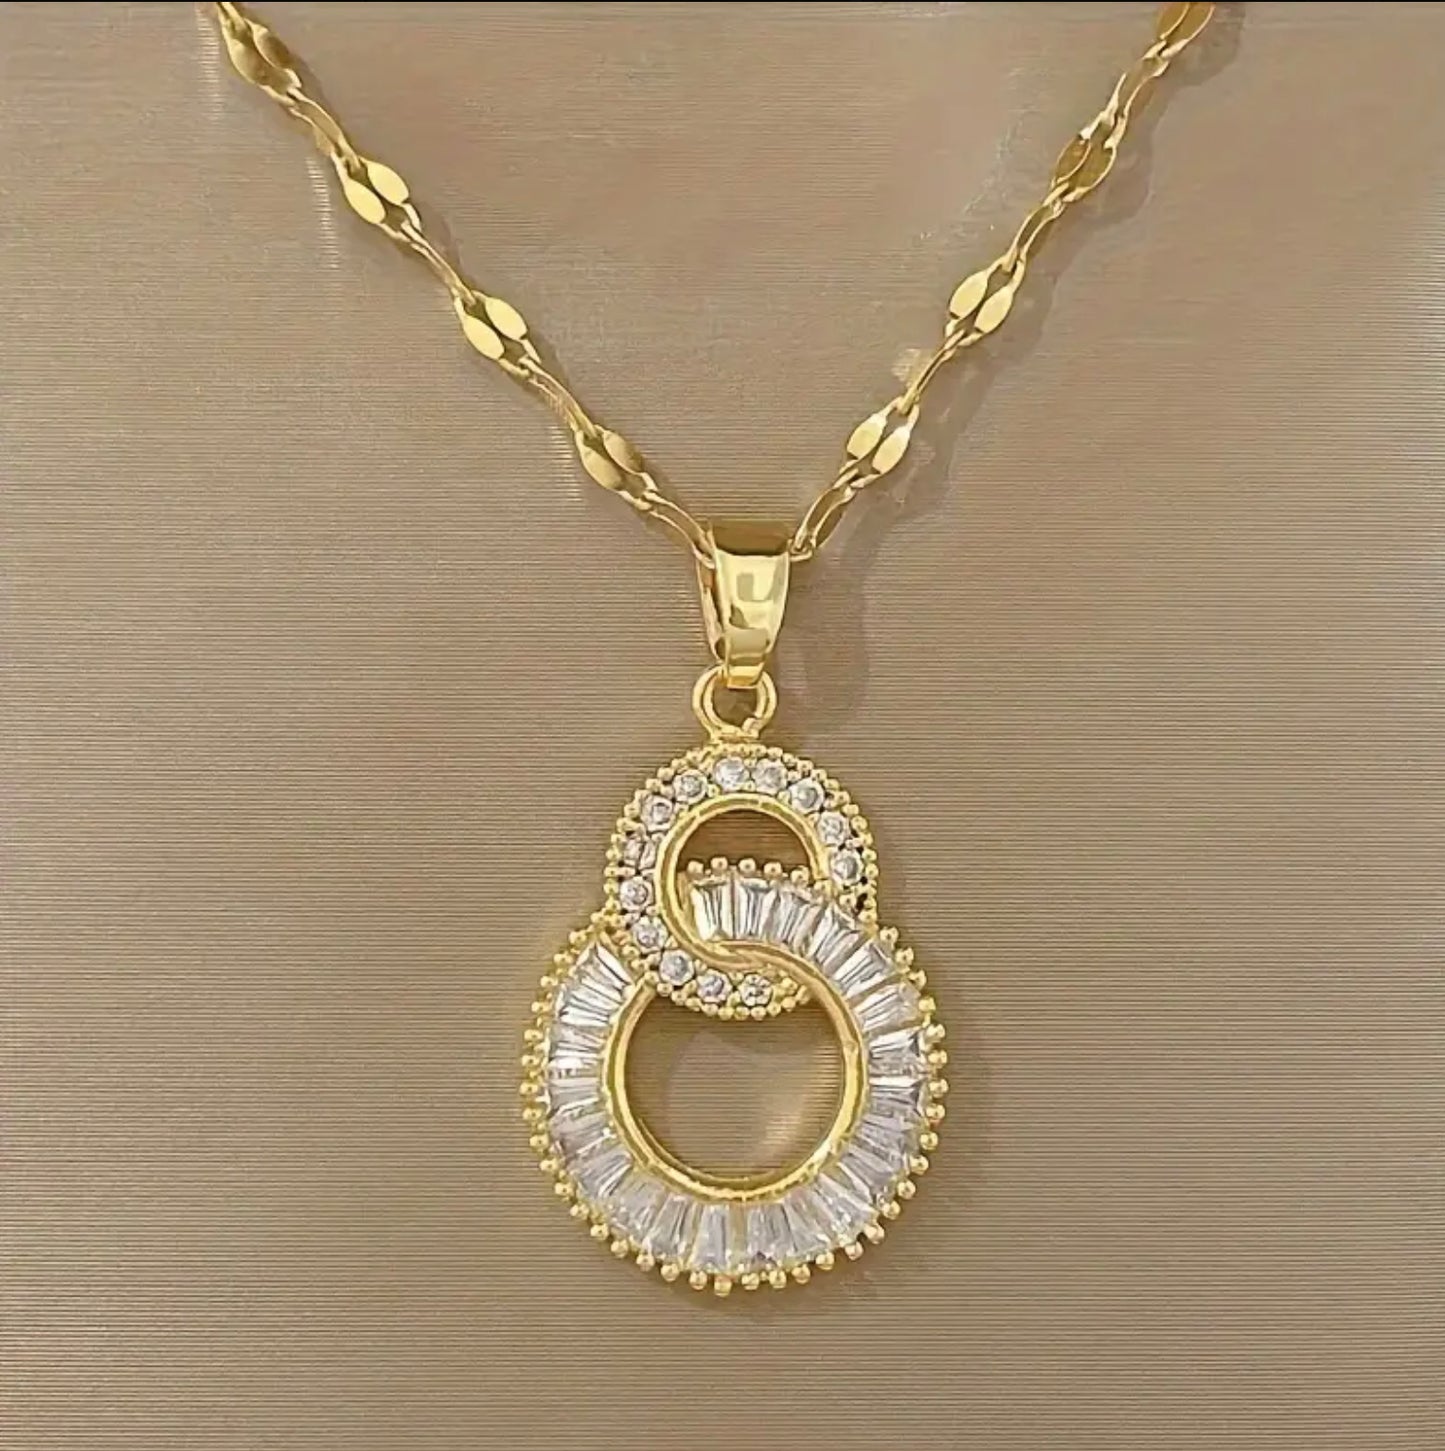 Necklace - Gold Stainless Steel